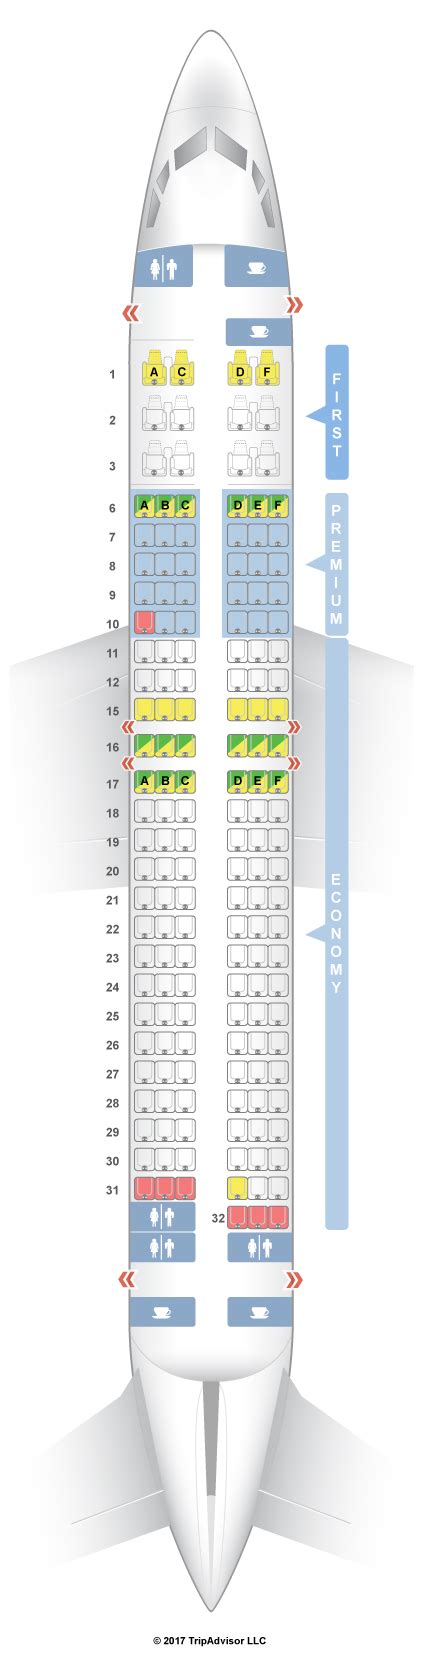 Alaska airlines 737 seat map. Icelandair added the Boeing 737 MAX 8 to their fleet in 2017. The aircraft is configured with 16 Saga Class seats and 144 Economy Class seats. In celebration of the 737 MAX 8, Icelandair in collaboration with Boyne Brewhouse in Ireland, release a 737 Transatlantic IPA. The beer is made with Pacific Northwest hops and European malts. 